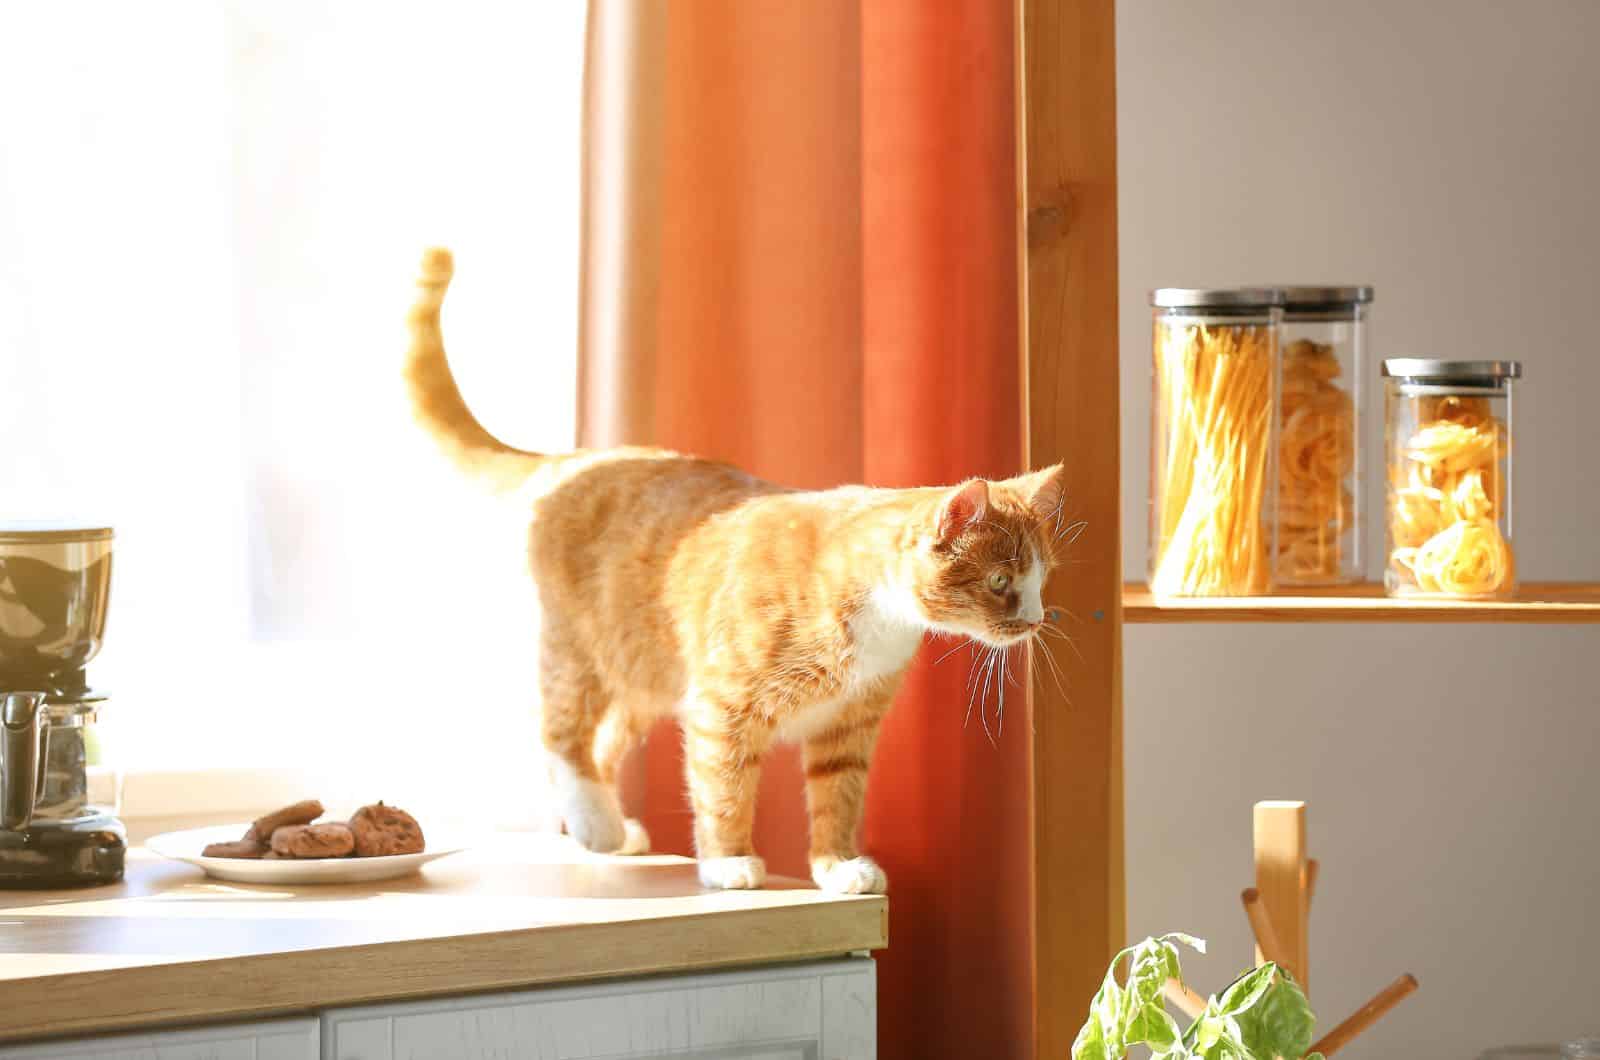 cat walking on a counter